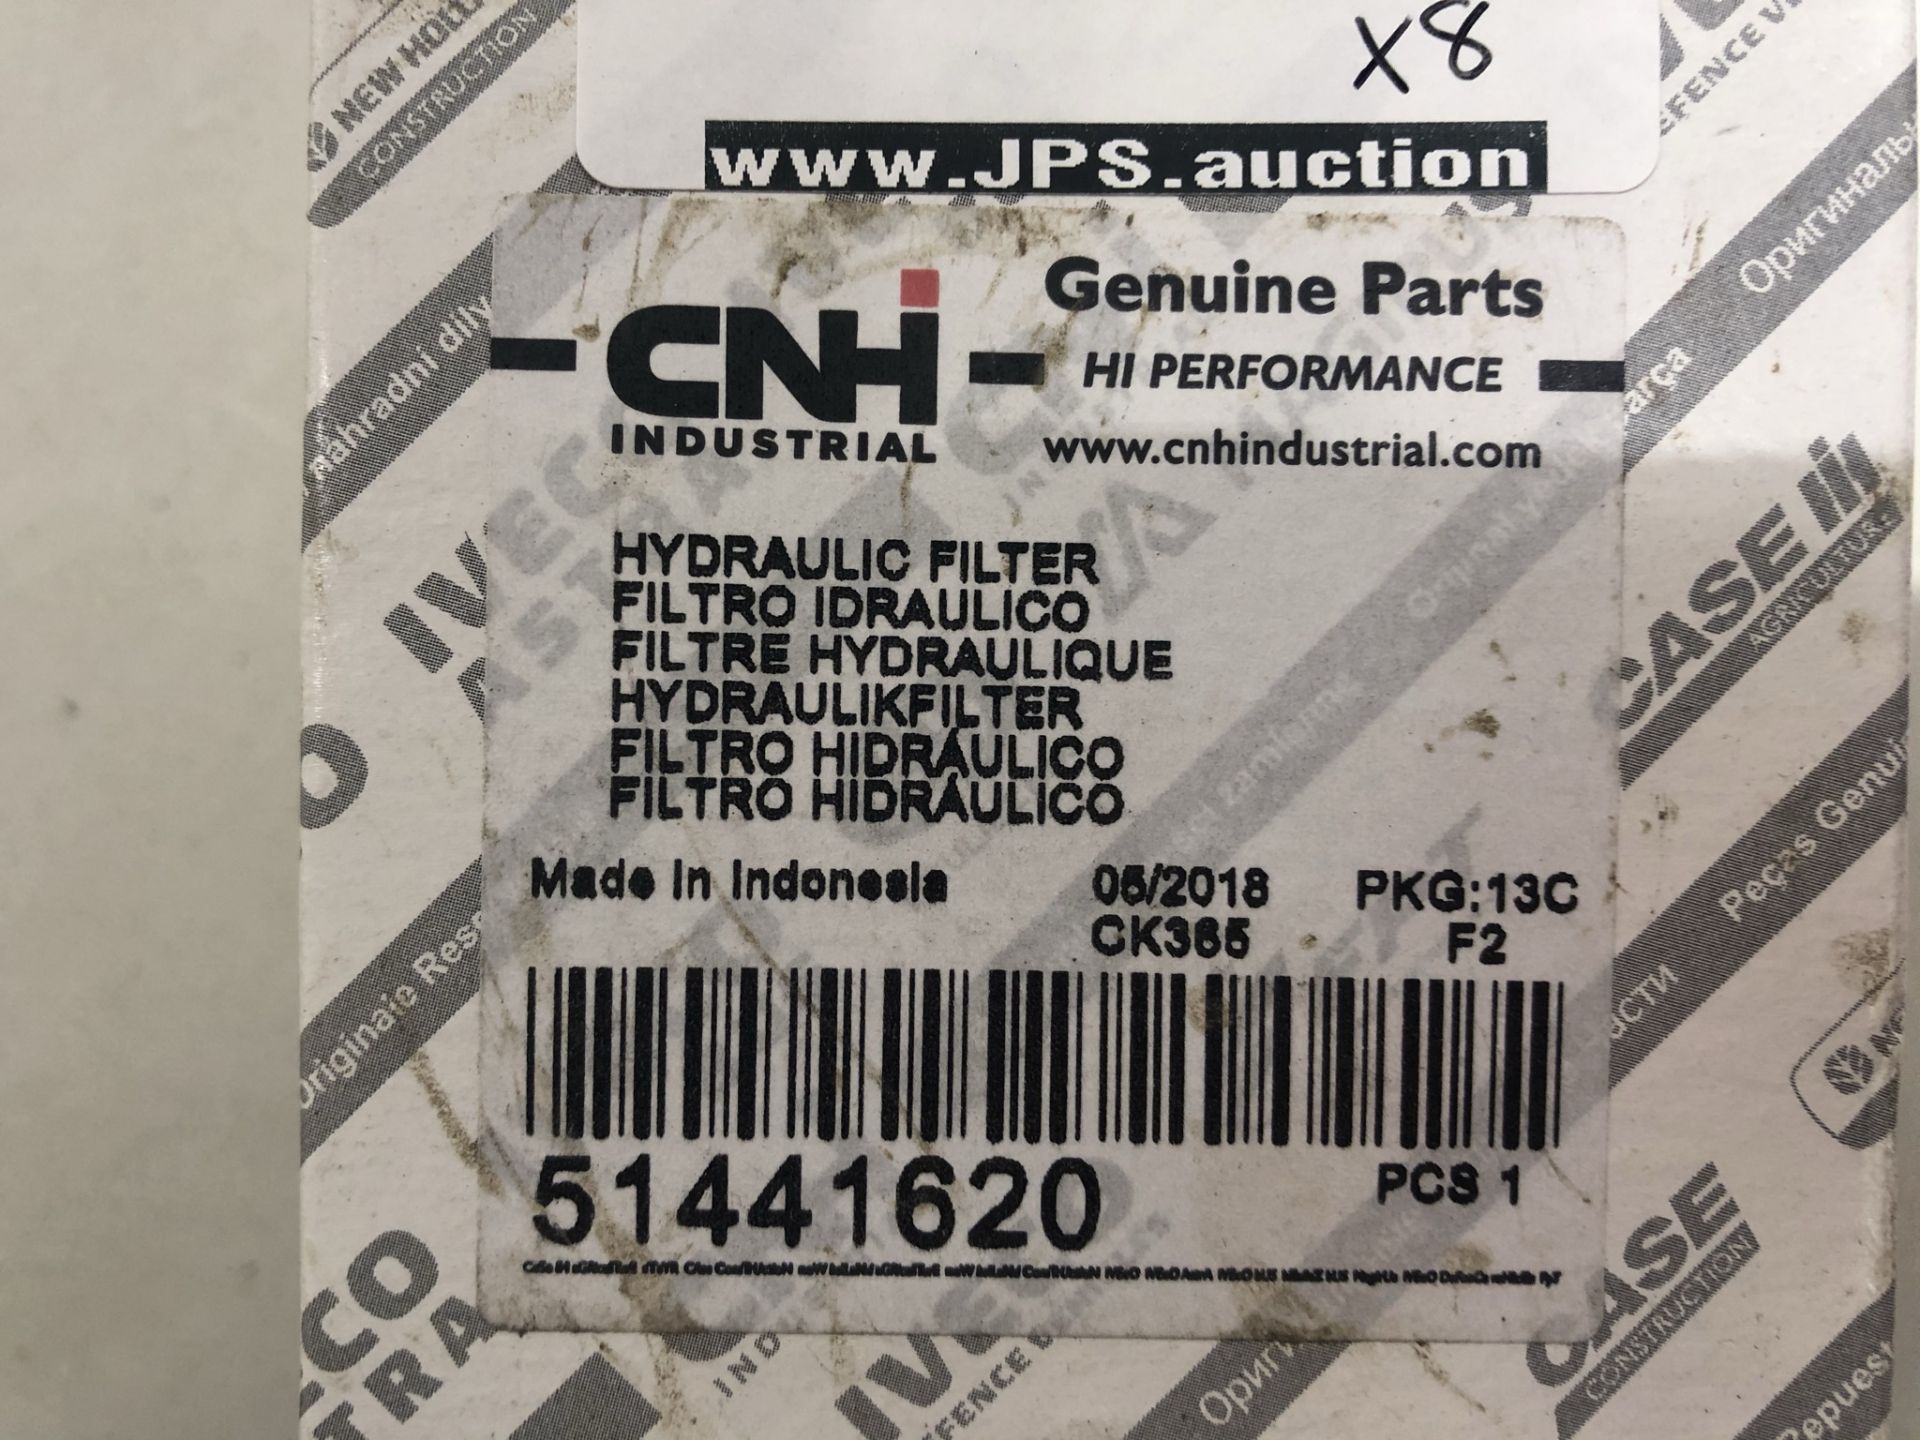 8 x CNH Hydraulic Filters - Image 4 of 5